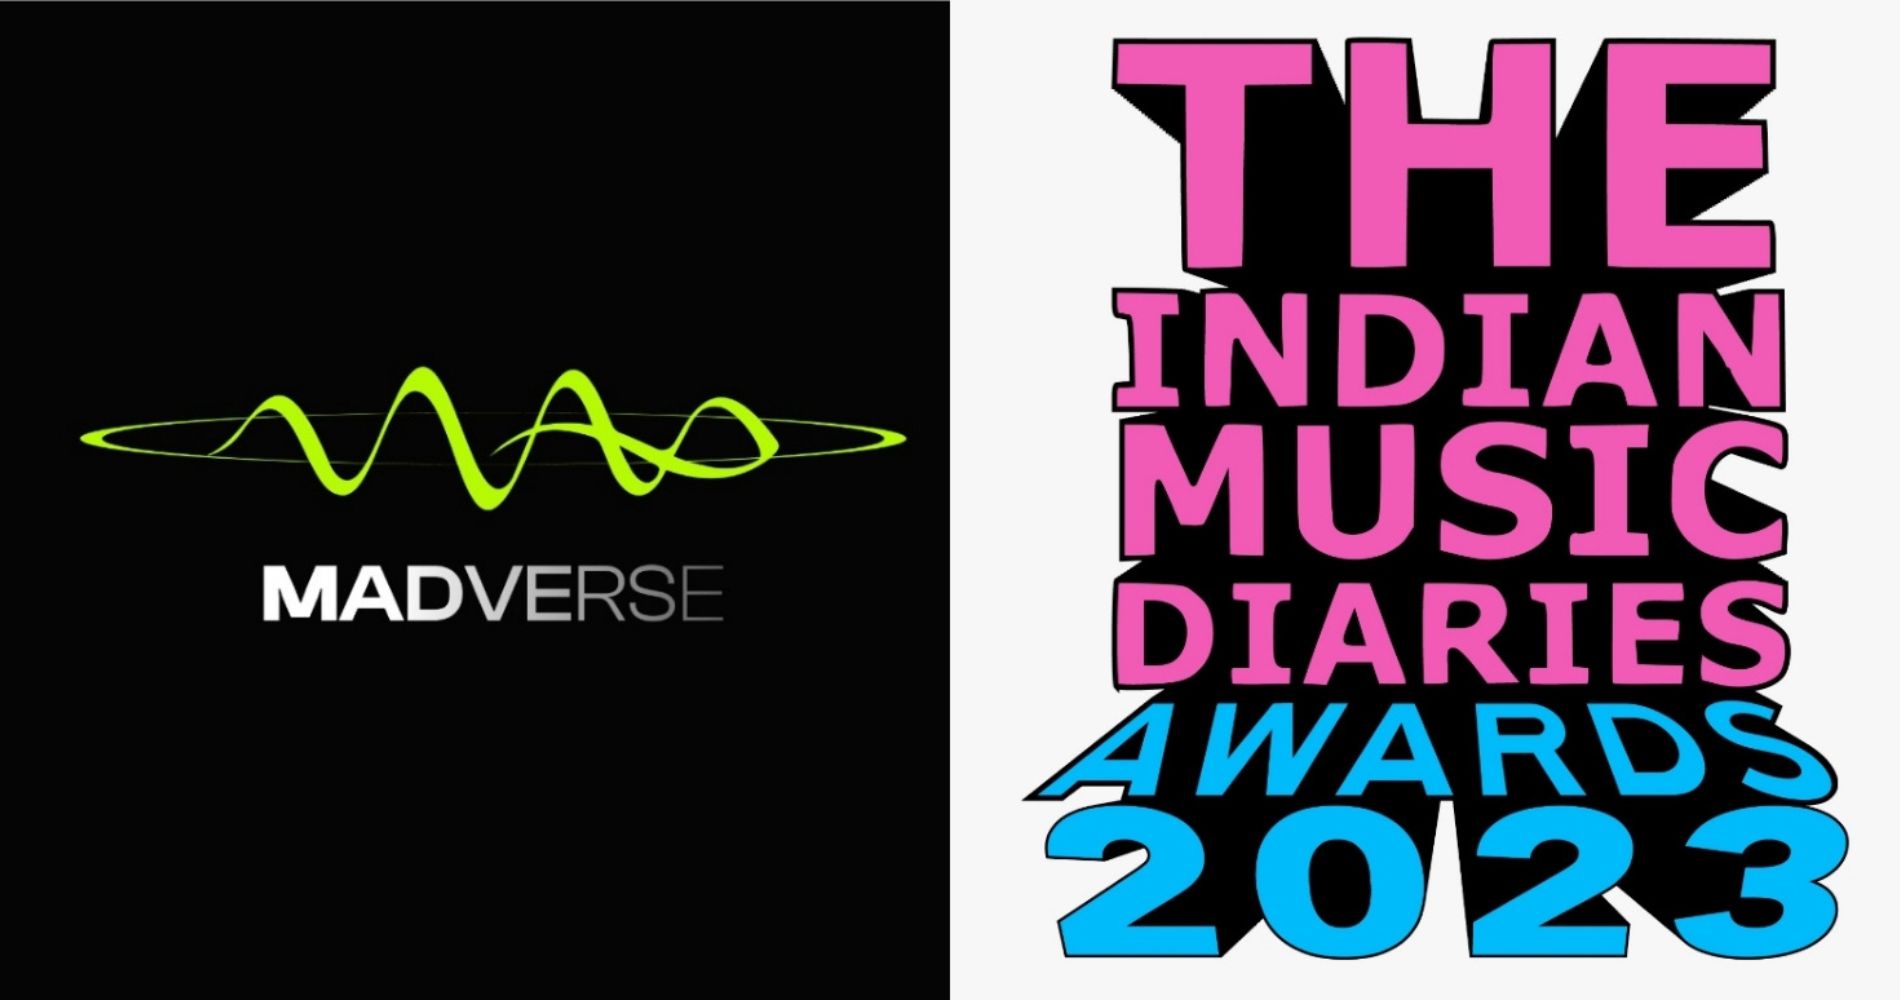 MADverse and Indian Music Diaries Join Forces to Revolutionise the